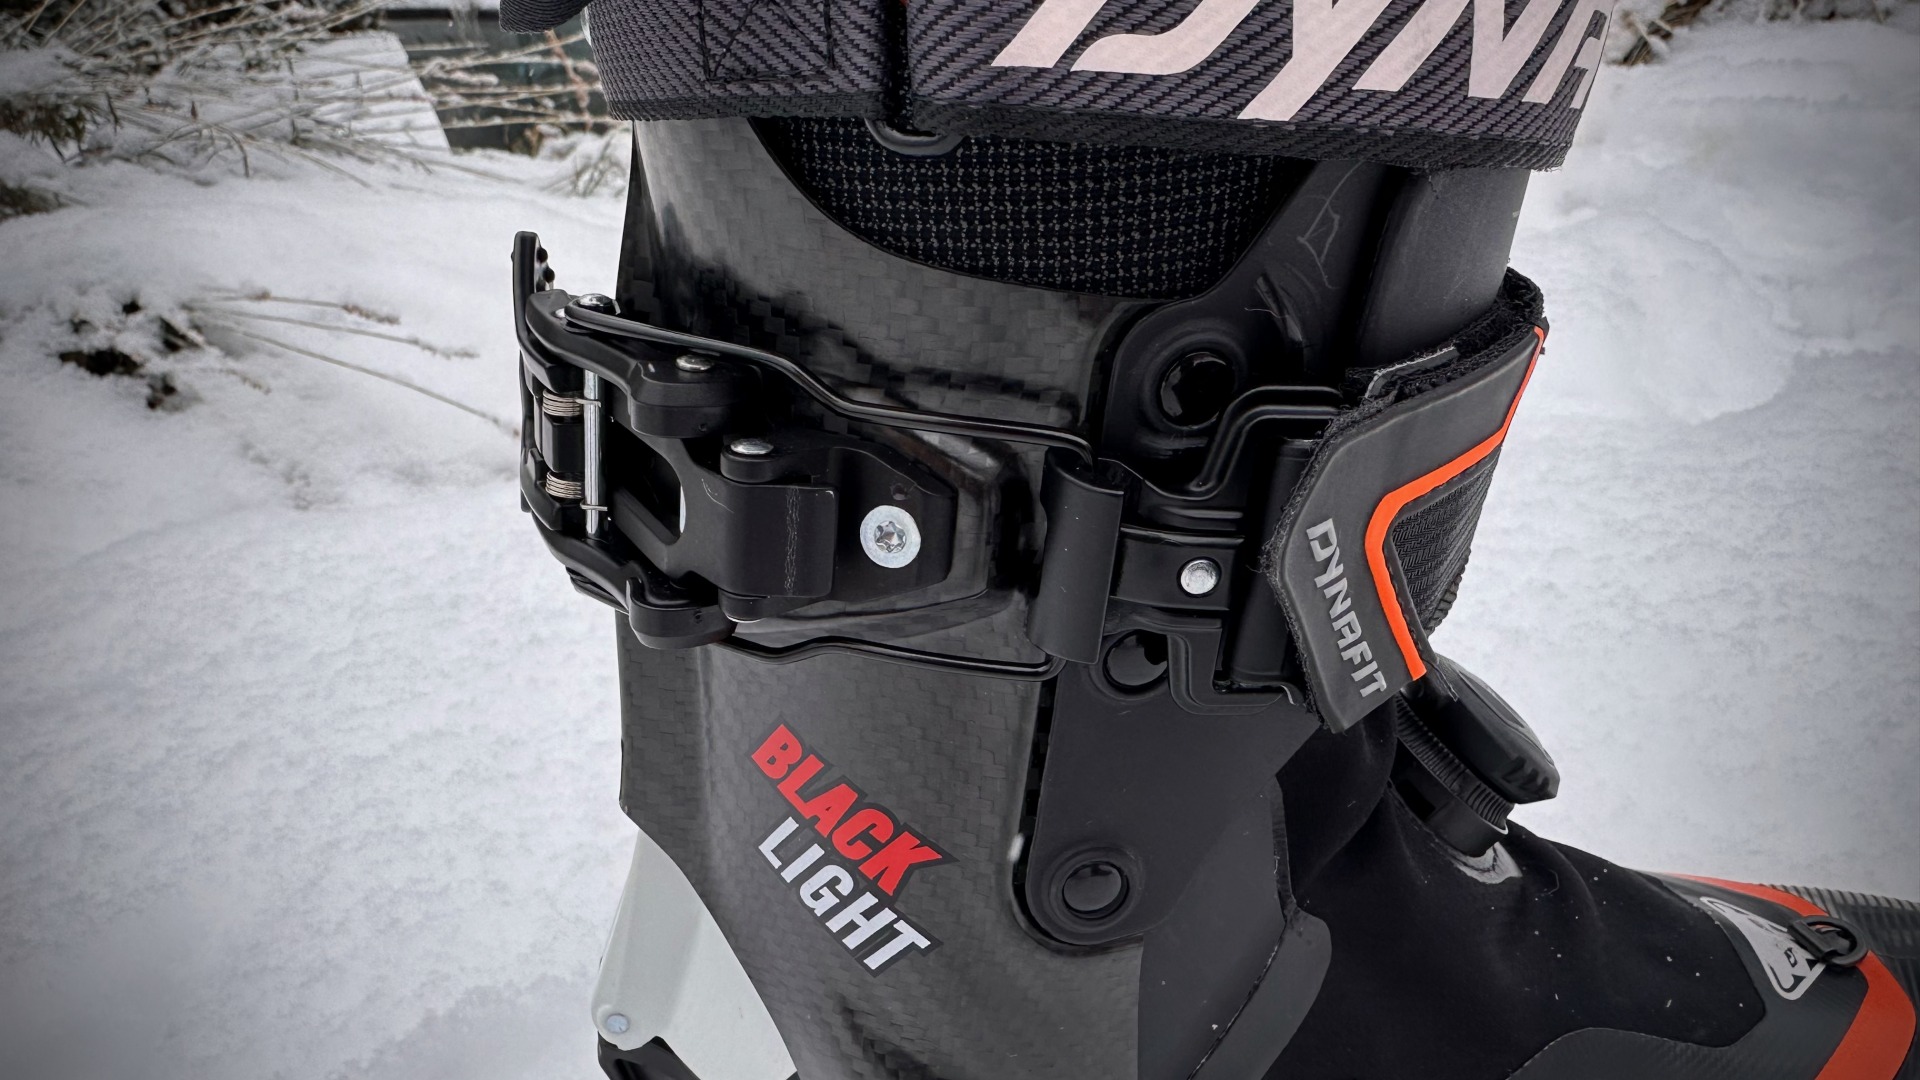 For the Love of Carbon: Dynafit's Blacklight Ski Boot - The Backcountry ...